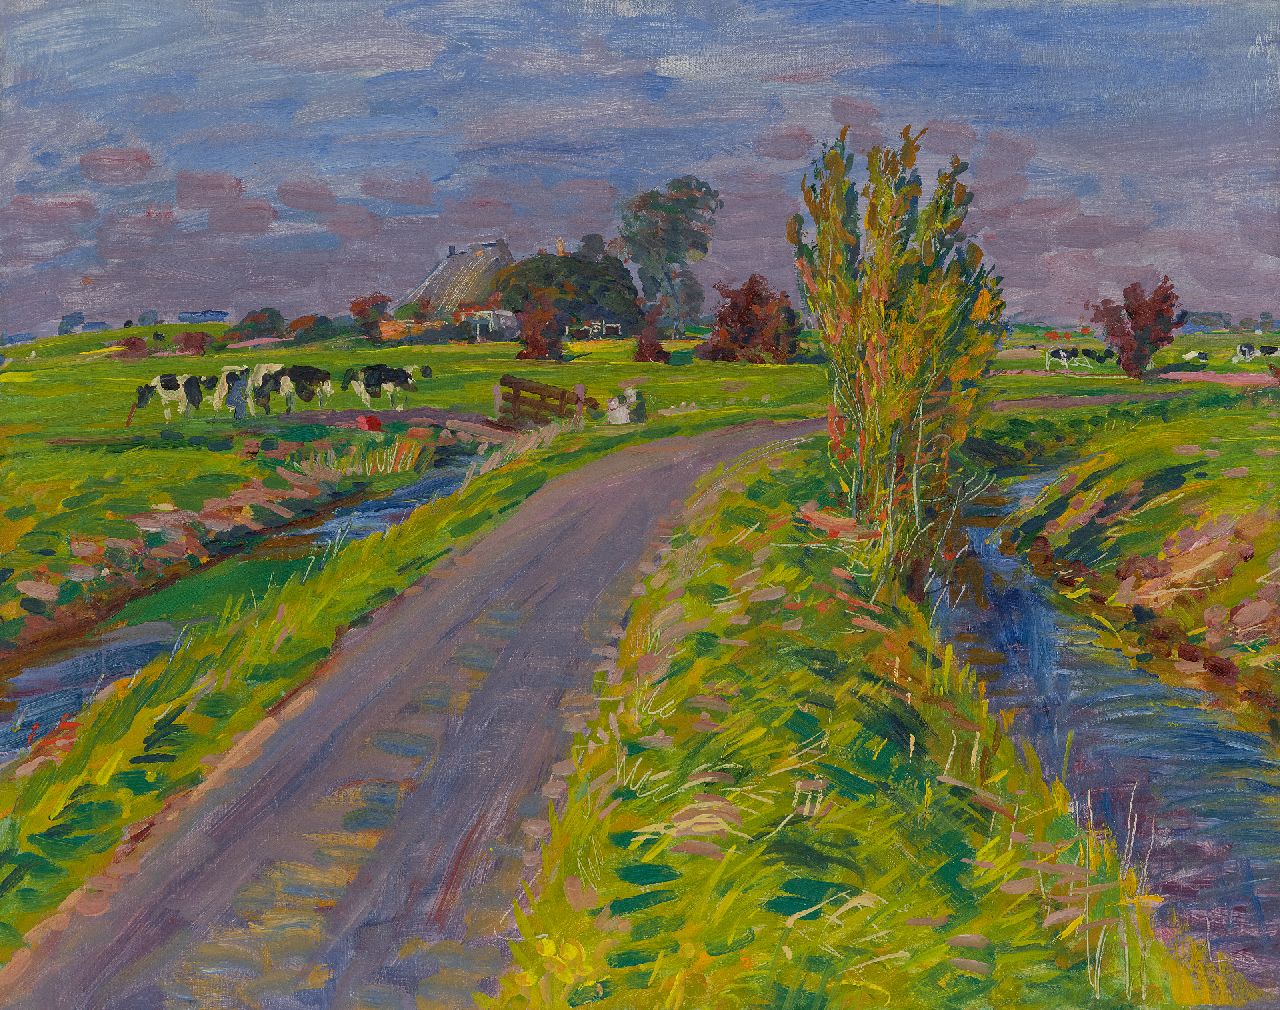 Dijkstra J.  | Johannes 'Johan' Dijkstra | Paintings offered for sale | Polder landscape with farm and cows; verso: Farm on a countryroad, oil on canvas 52.4 x 66.0 cm, painted ca. 1930